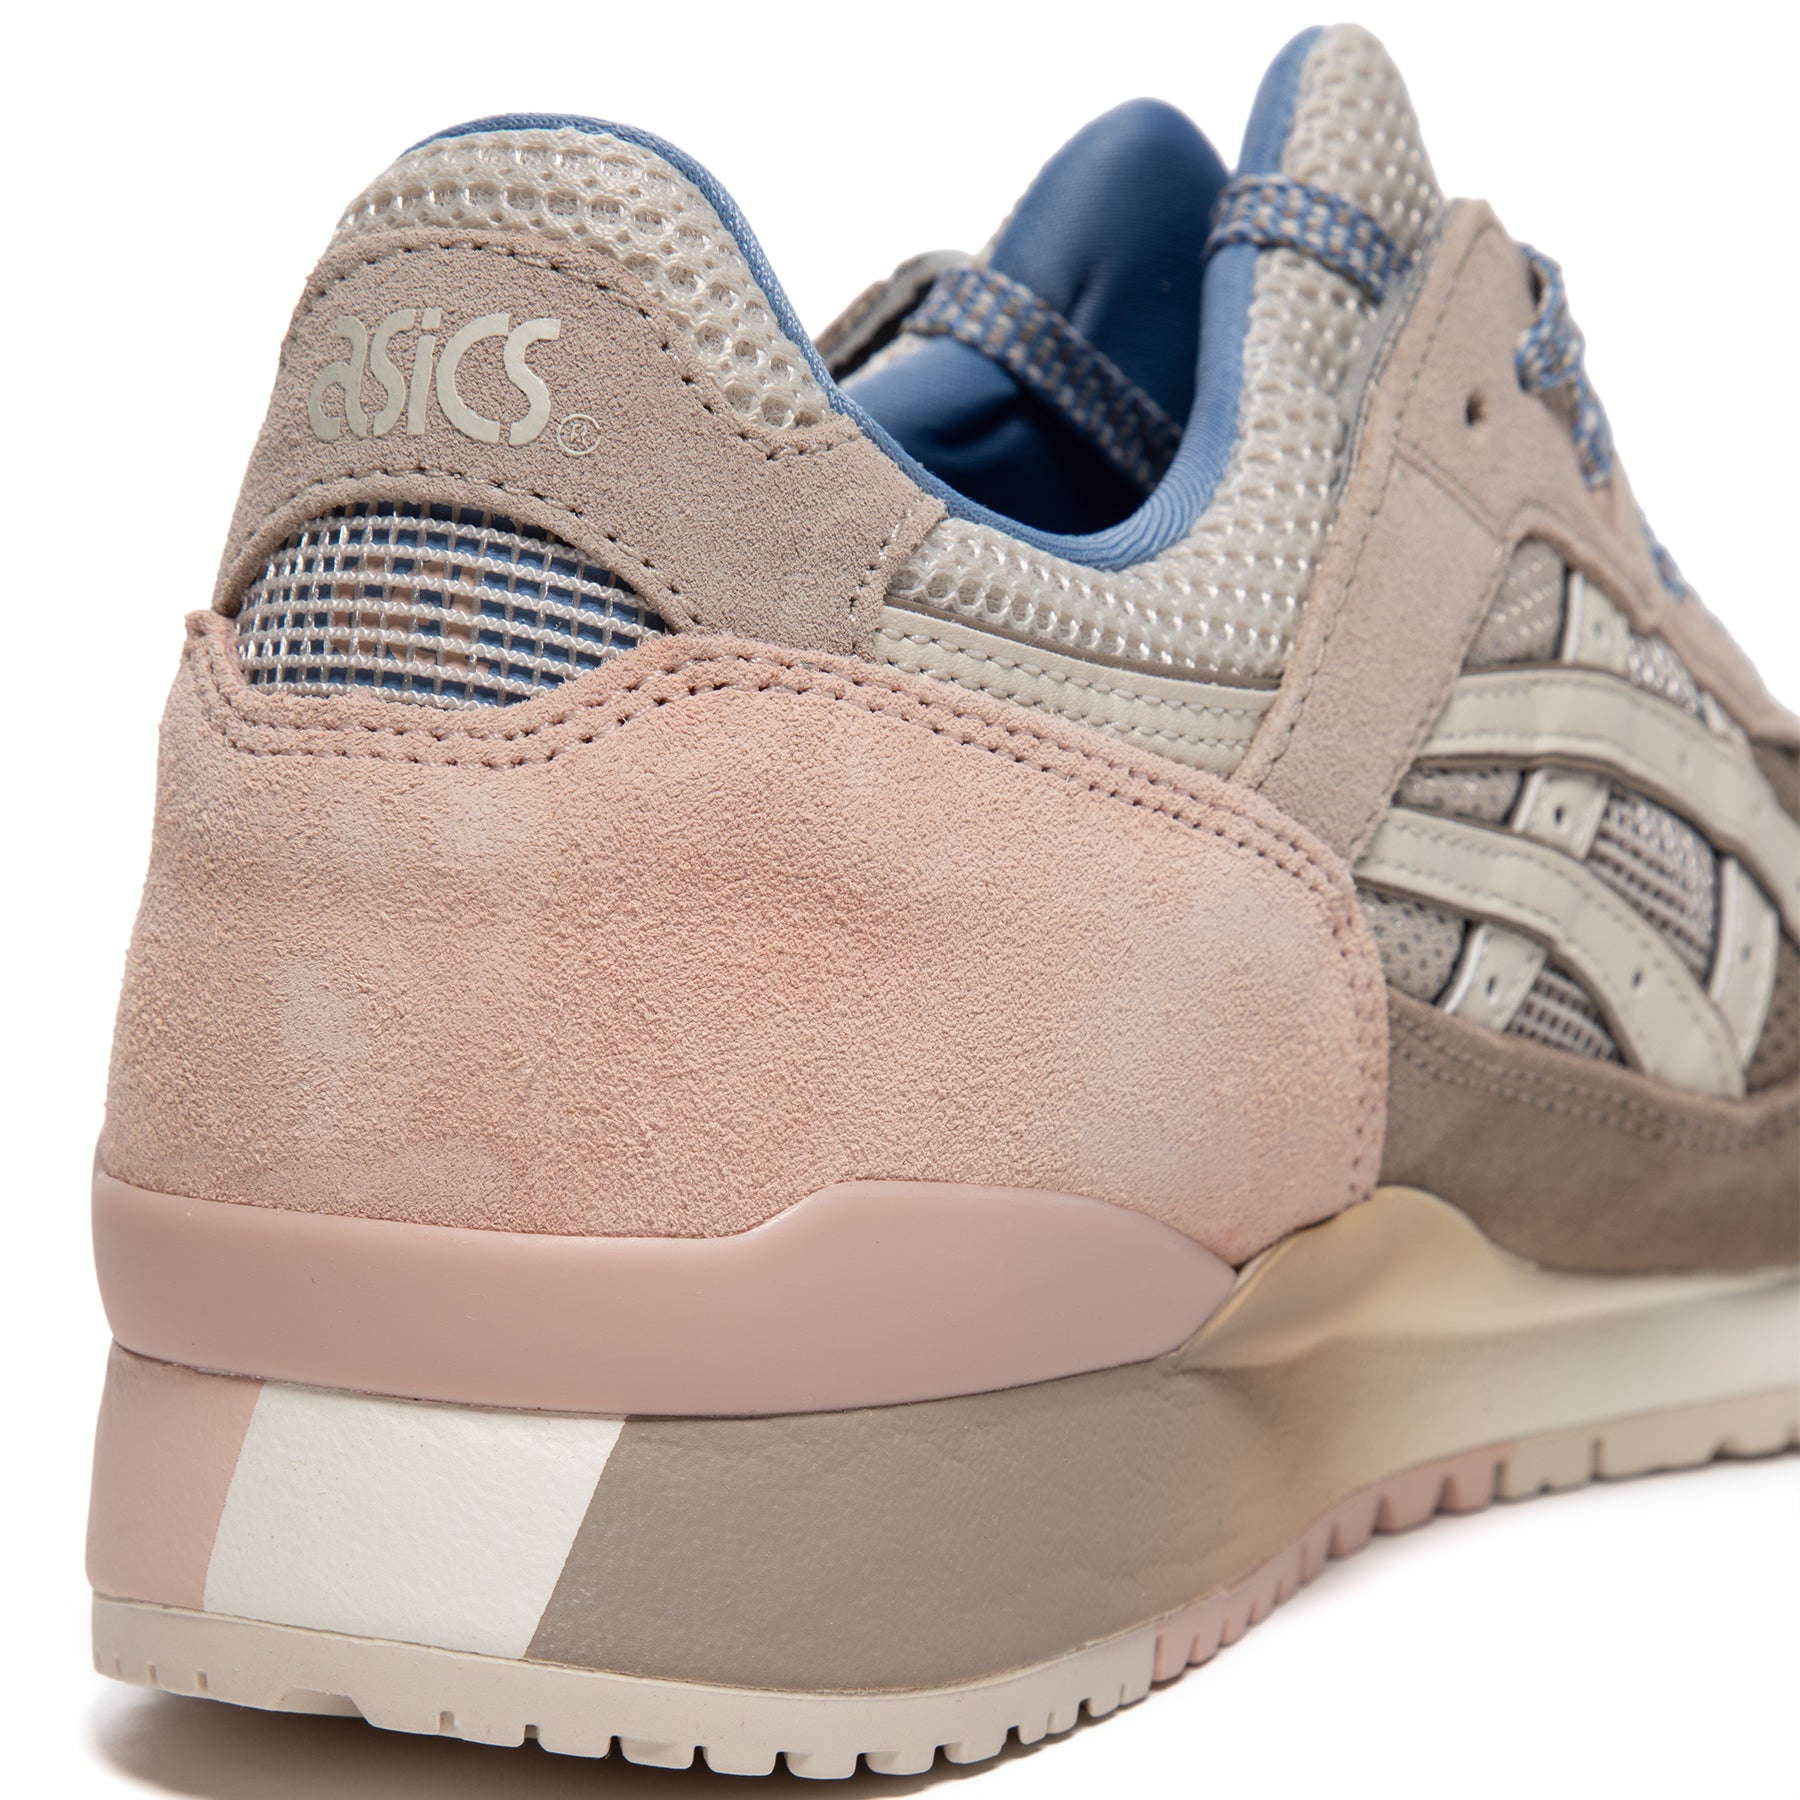 Asics Gel-Lyte III OG (Simply Taupe/Maple – Concepts